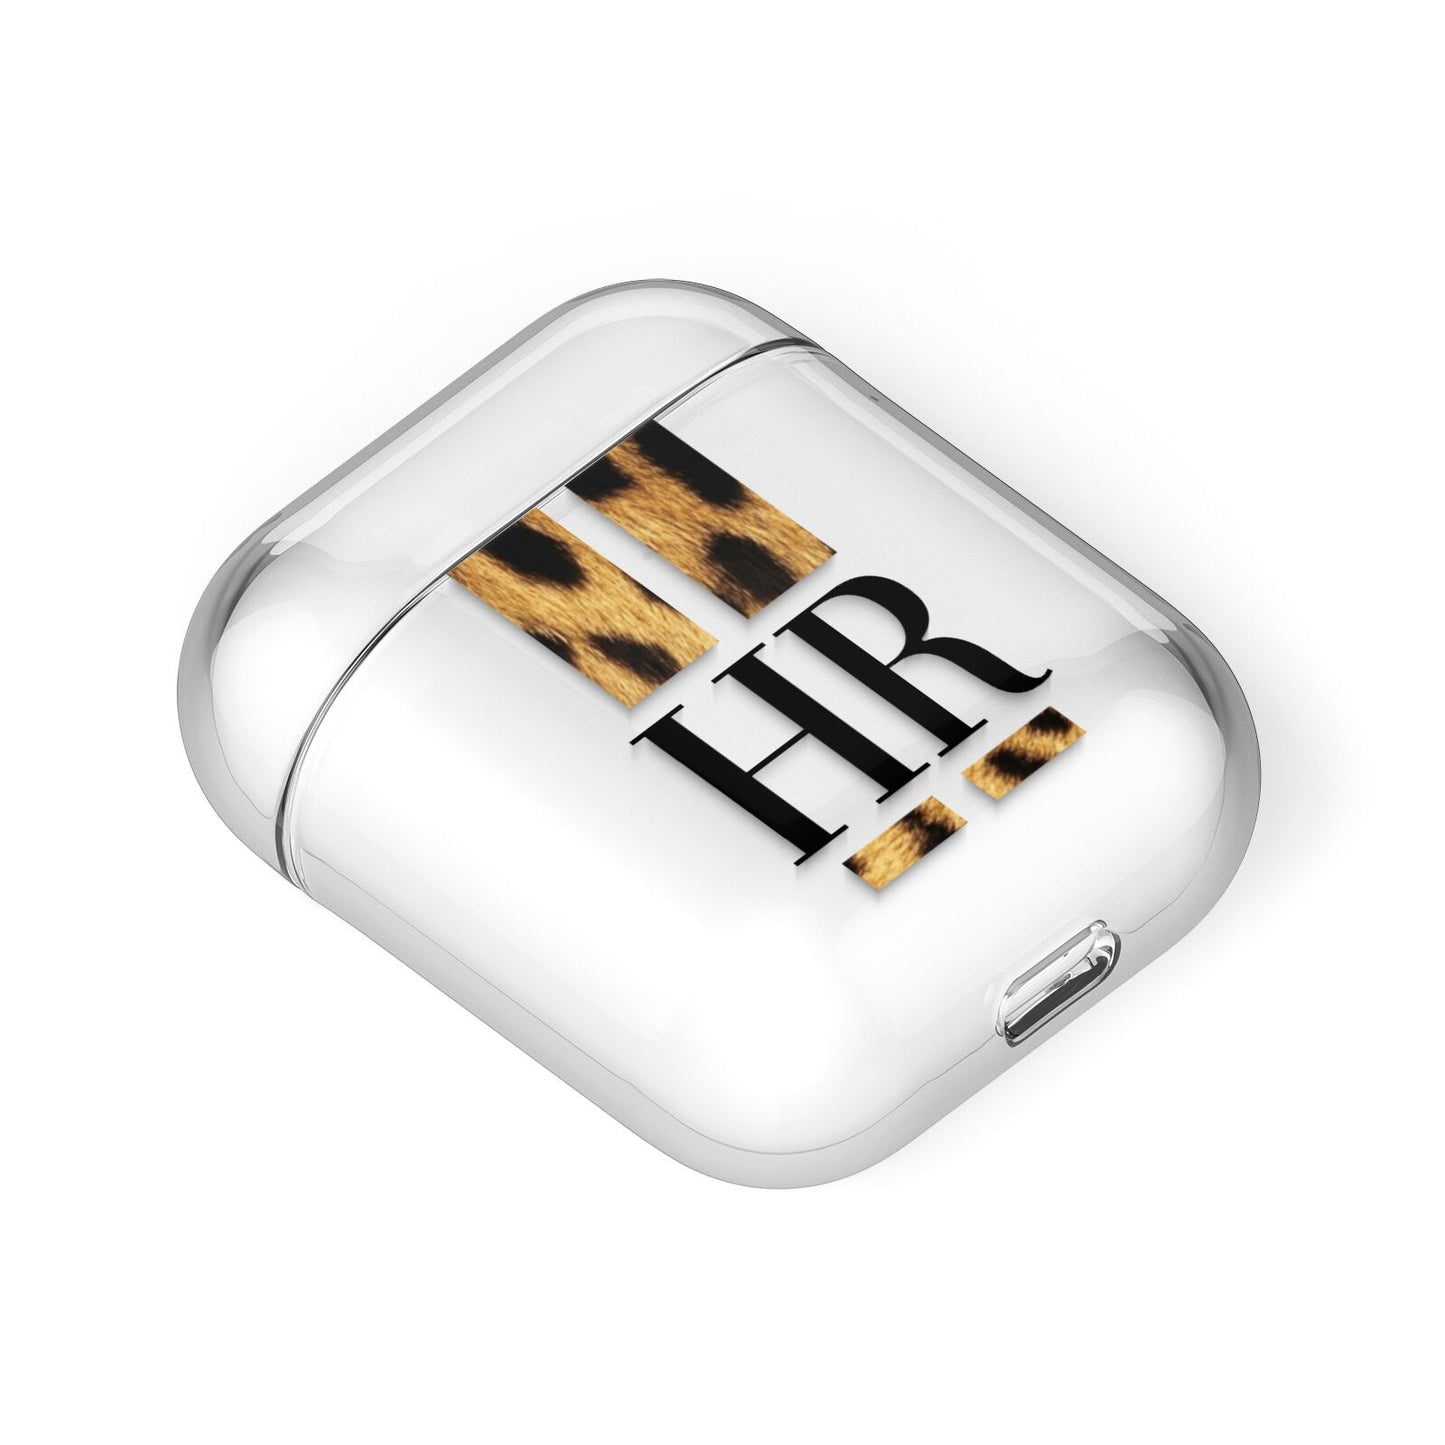 Initialled Leopard Print Stripes AirPods Case Laid Flat